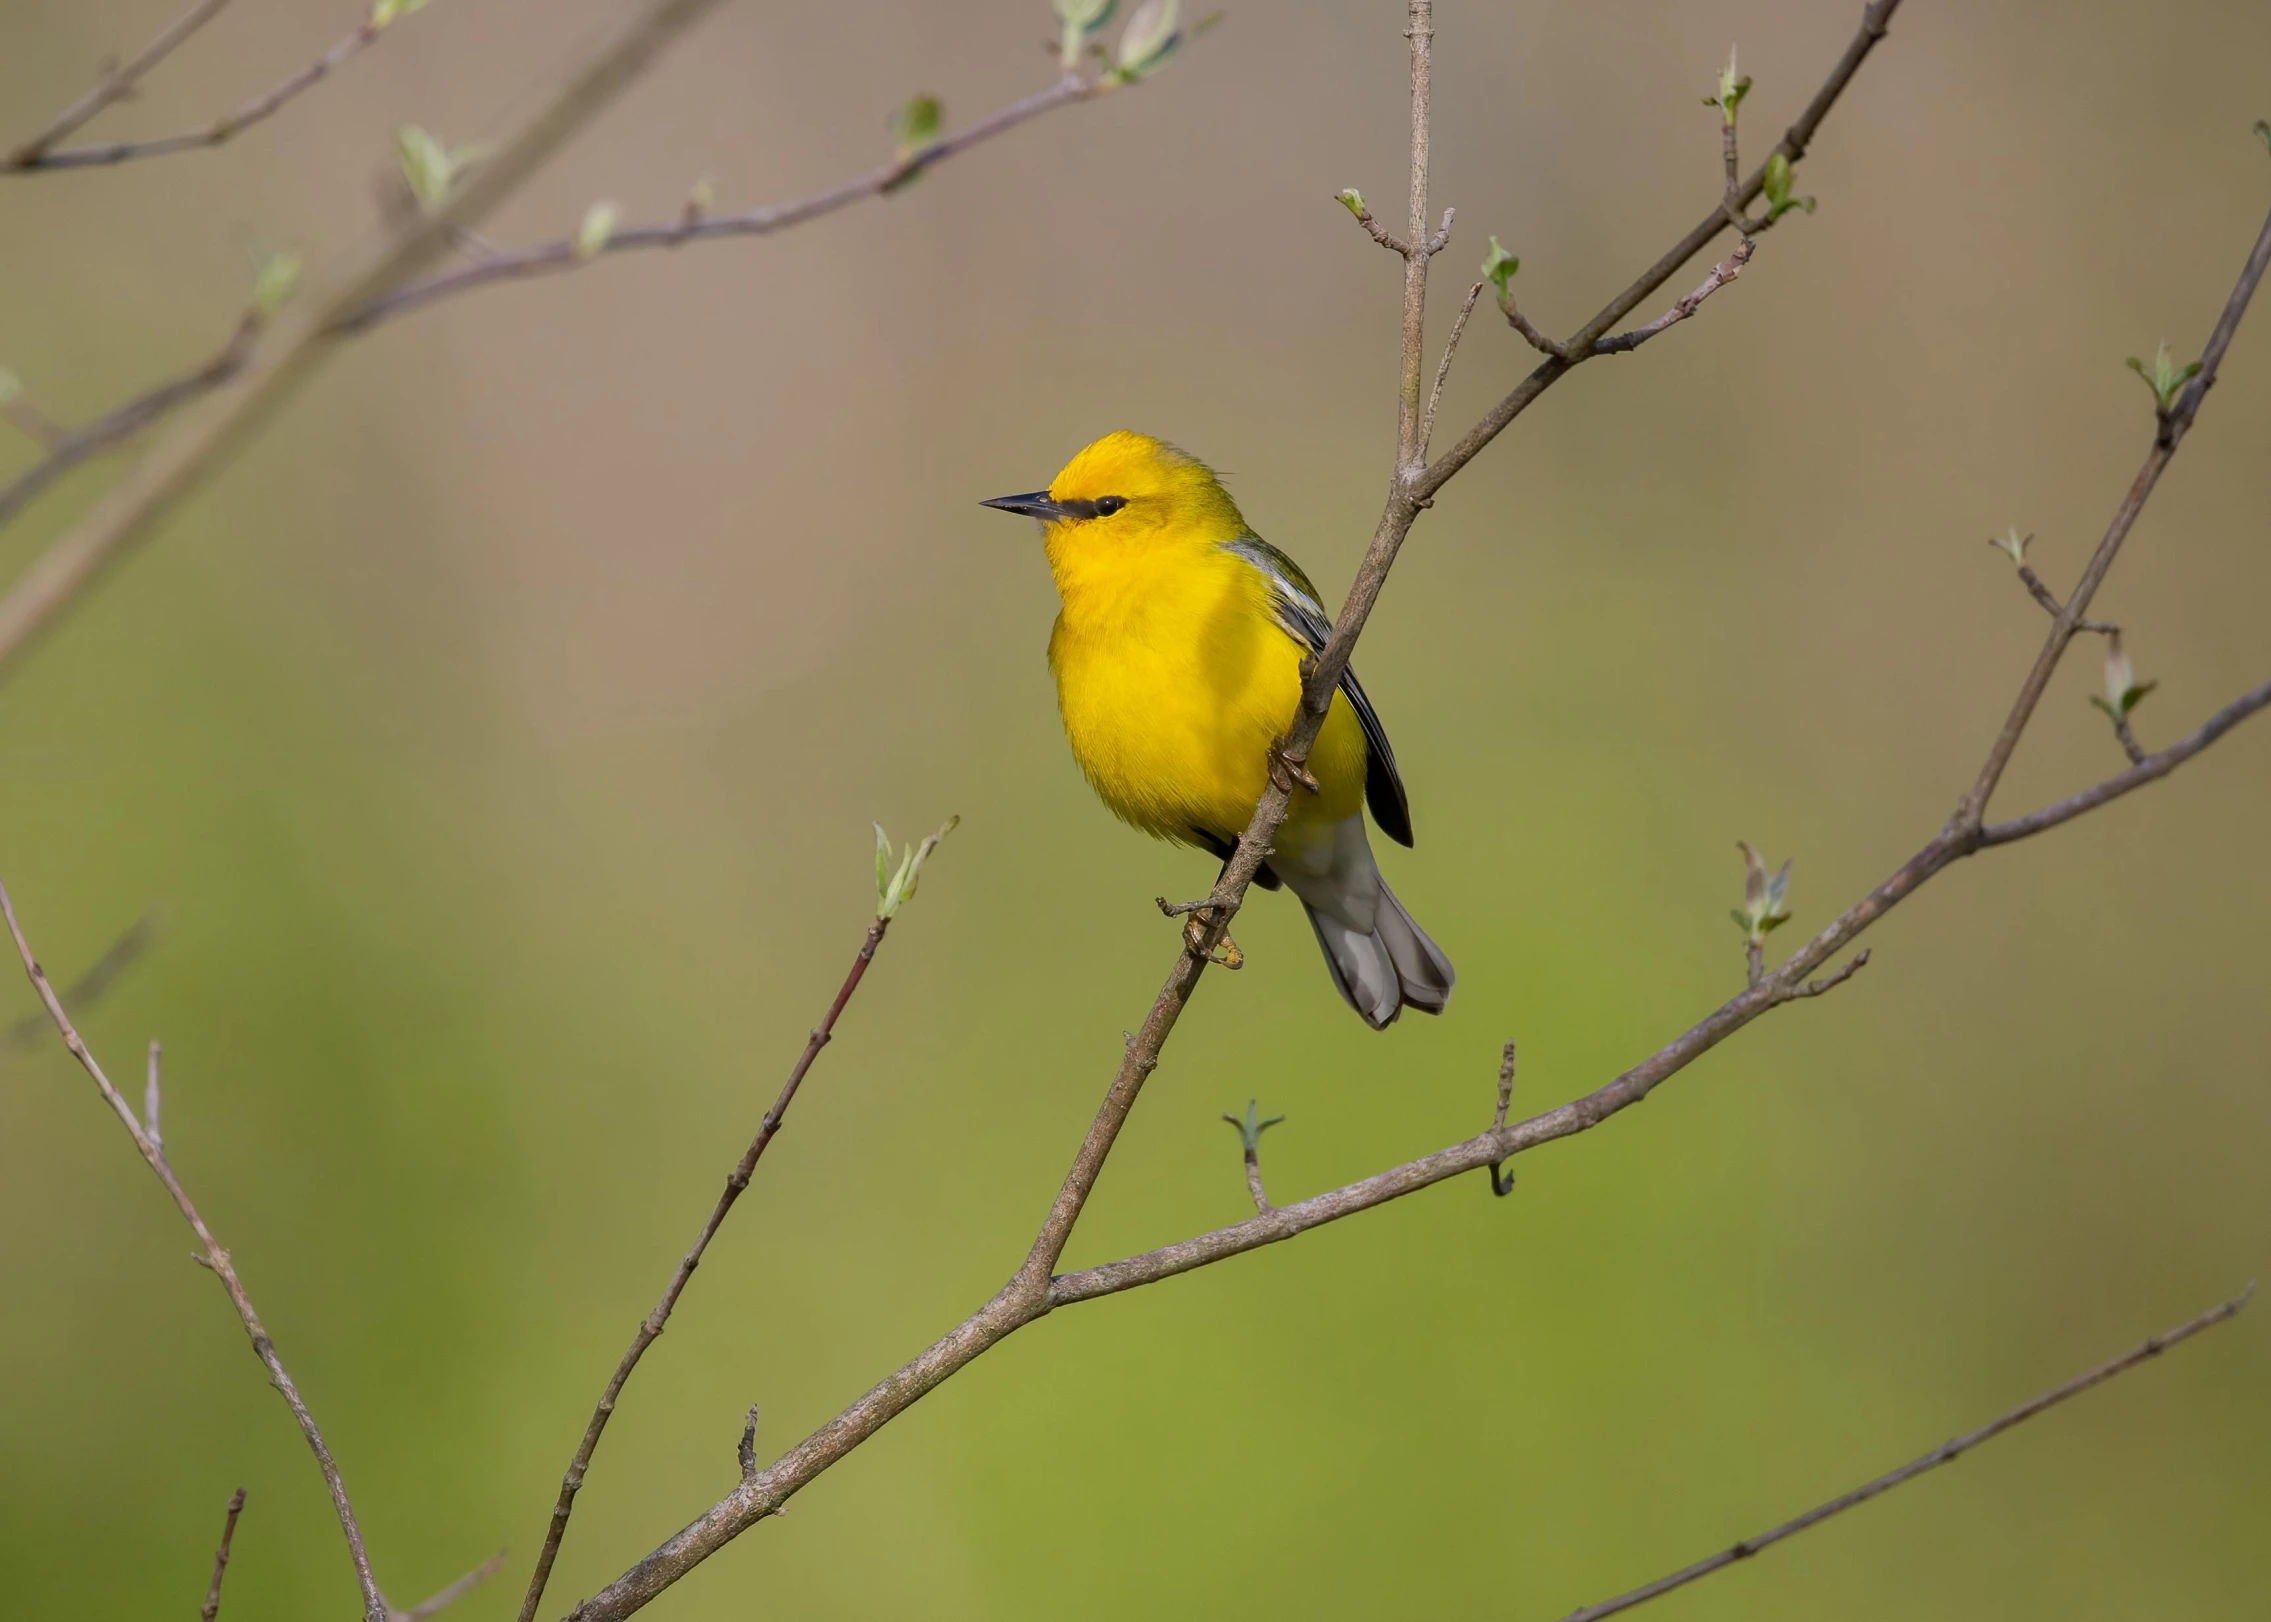 a bright yellow bird sitting on the nch of a tree